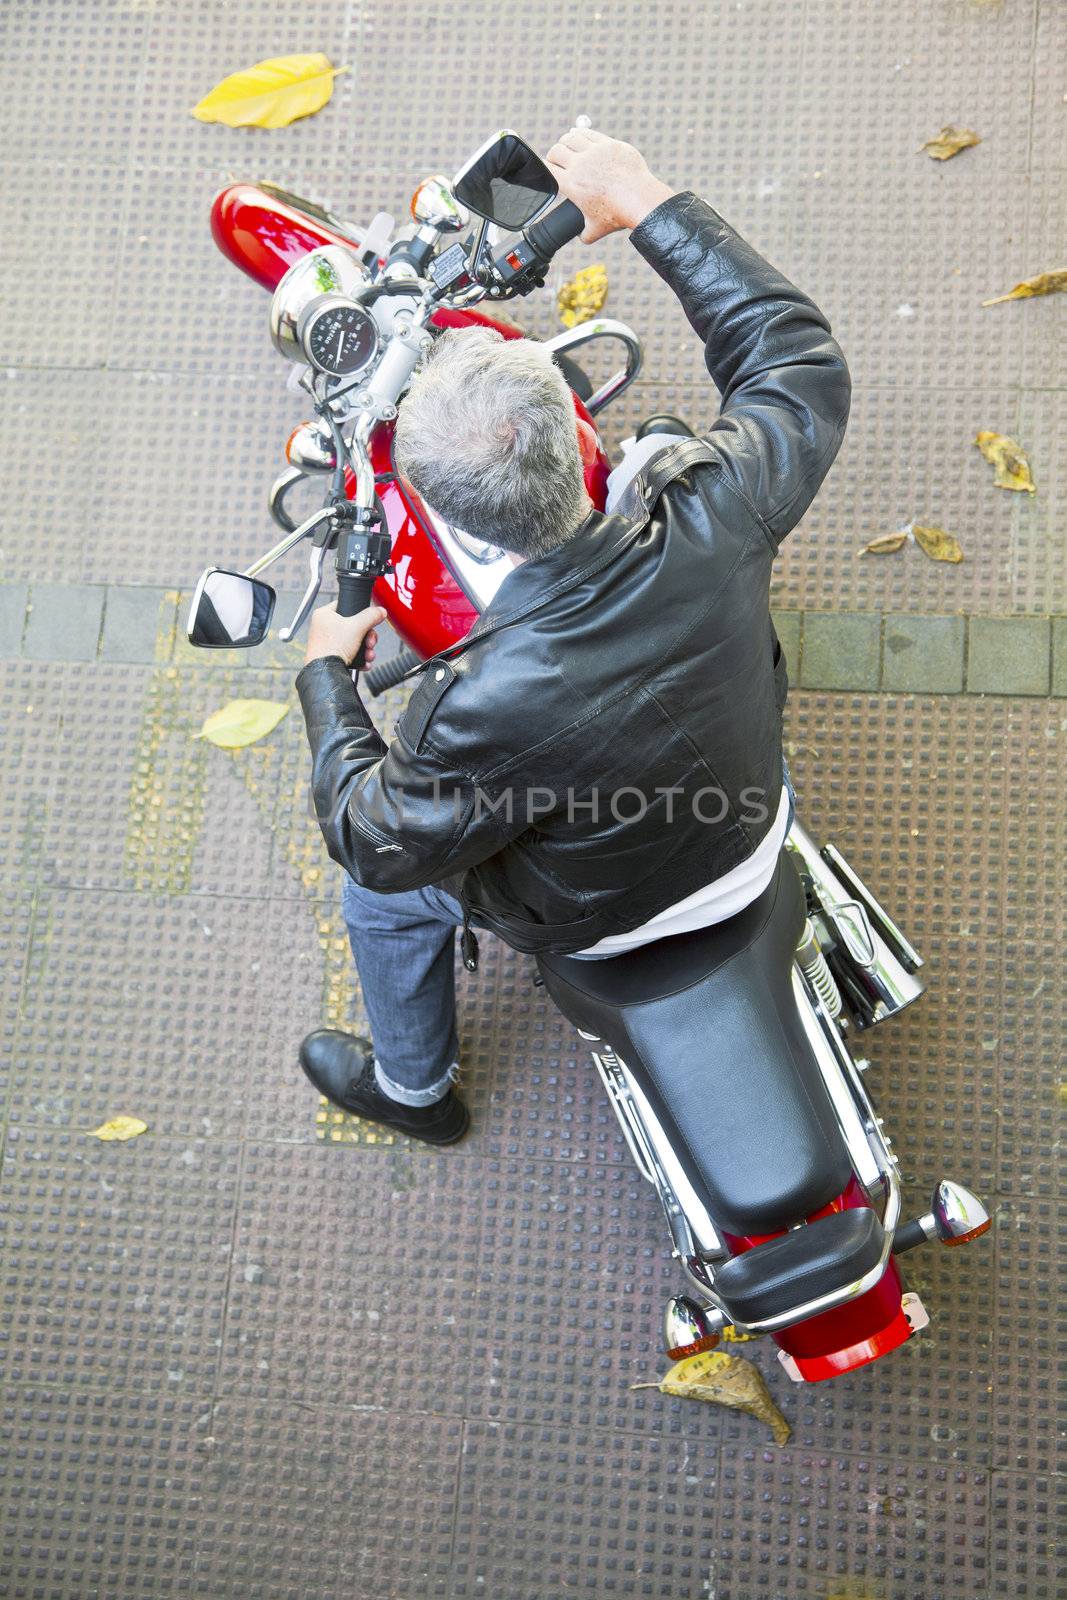 Diagonal aerial viewpoint of a stationary red motorbike and a Grey haired senior rider in leather jacket, denim jeans and boots on a tied floor with fallen autumn leaves. Generic shot taken in Bombay India